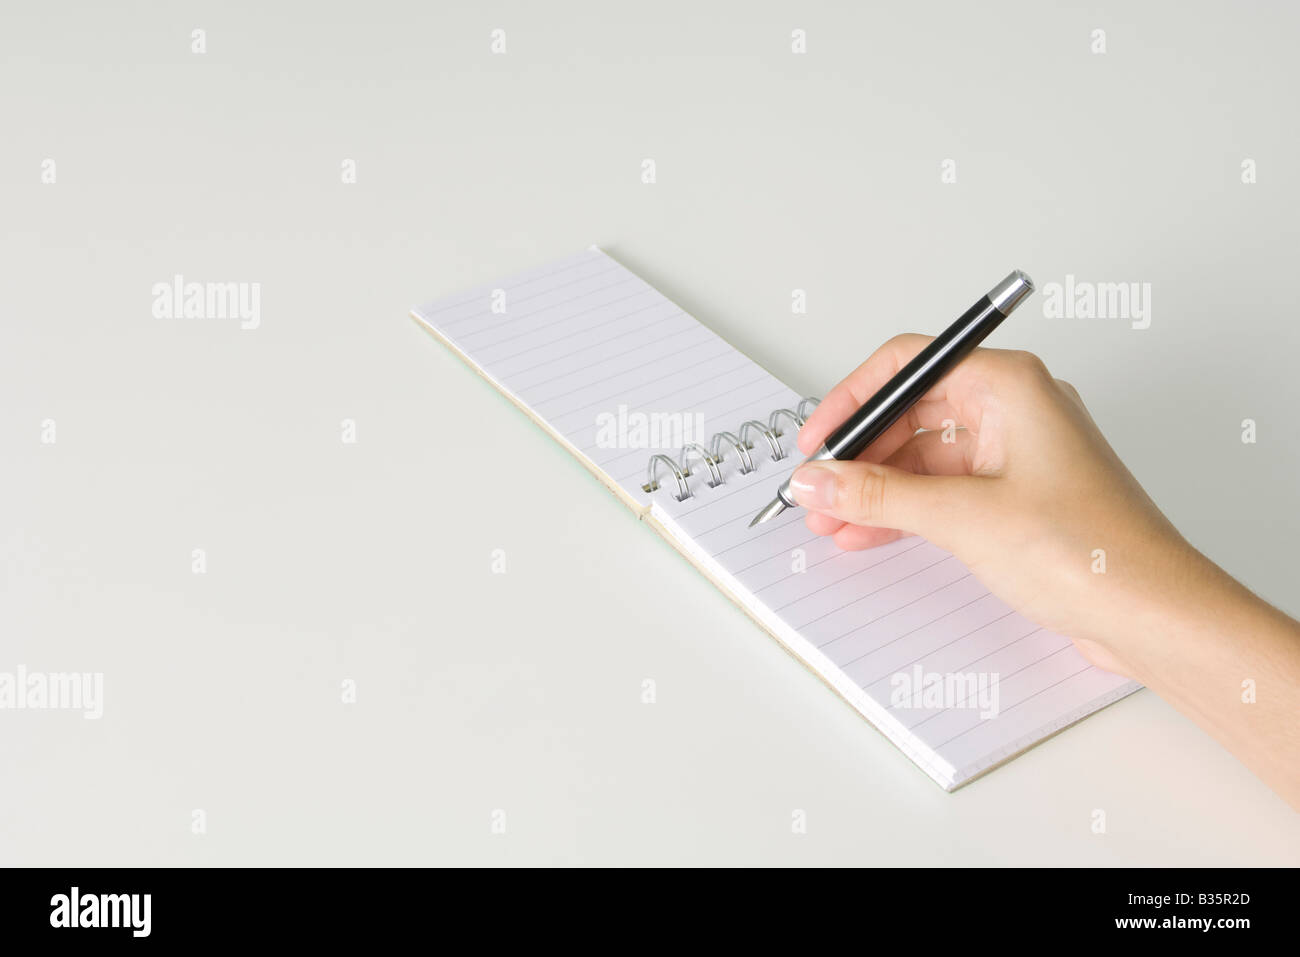 Hand holding pen, poised to write in notepad flipped open, cropped view Stock Photo